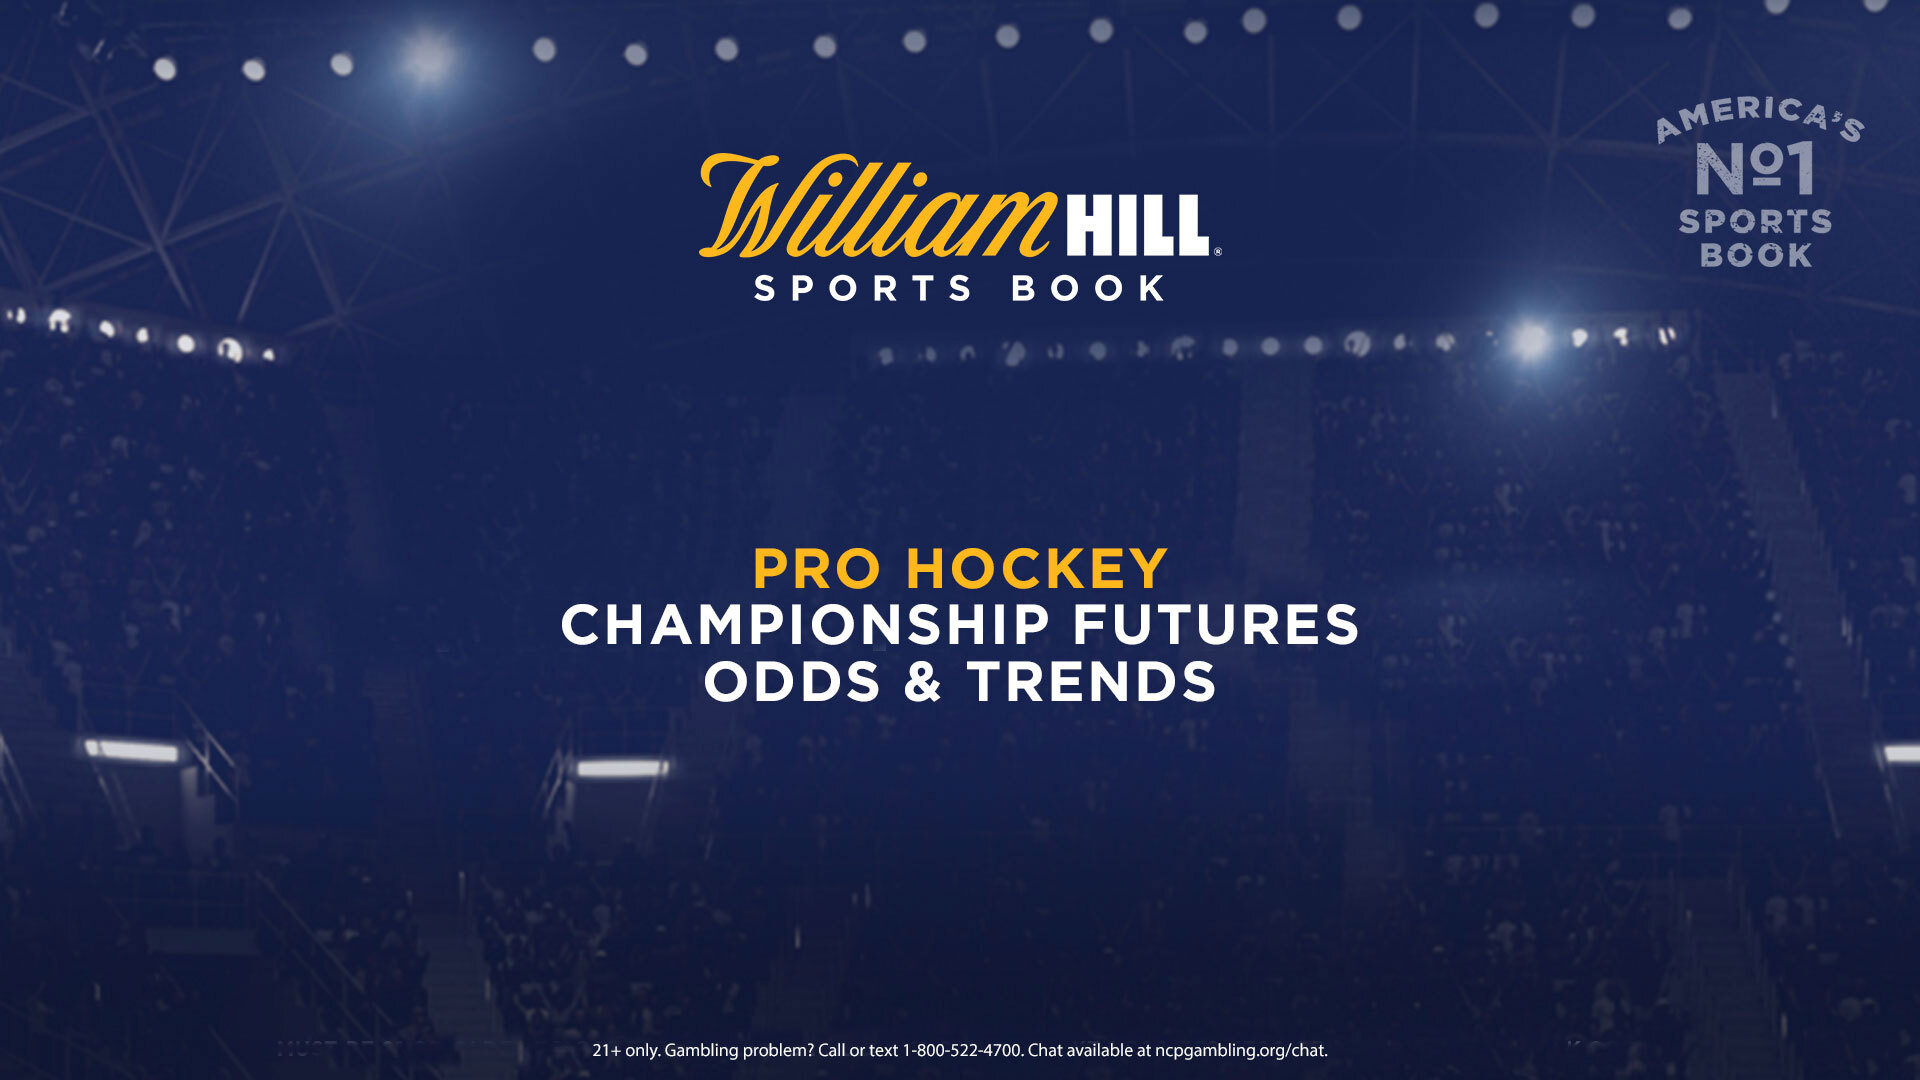 Chicago Blackhawks: New Stanley Cup 2020 odds